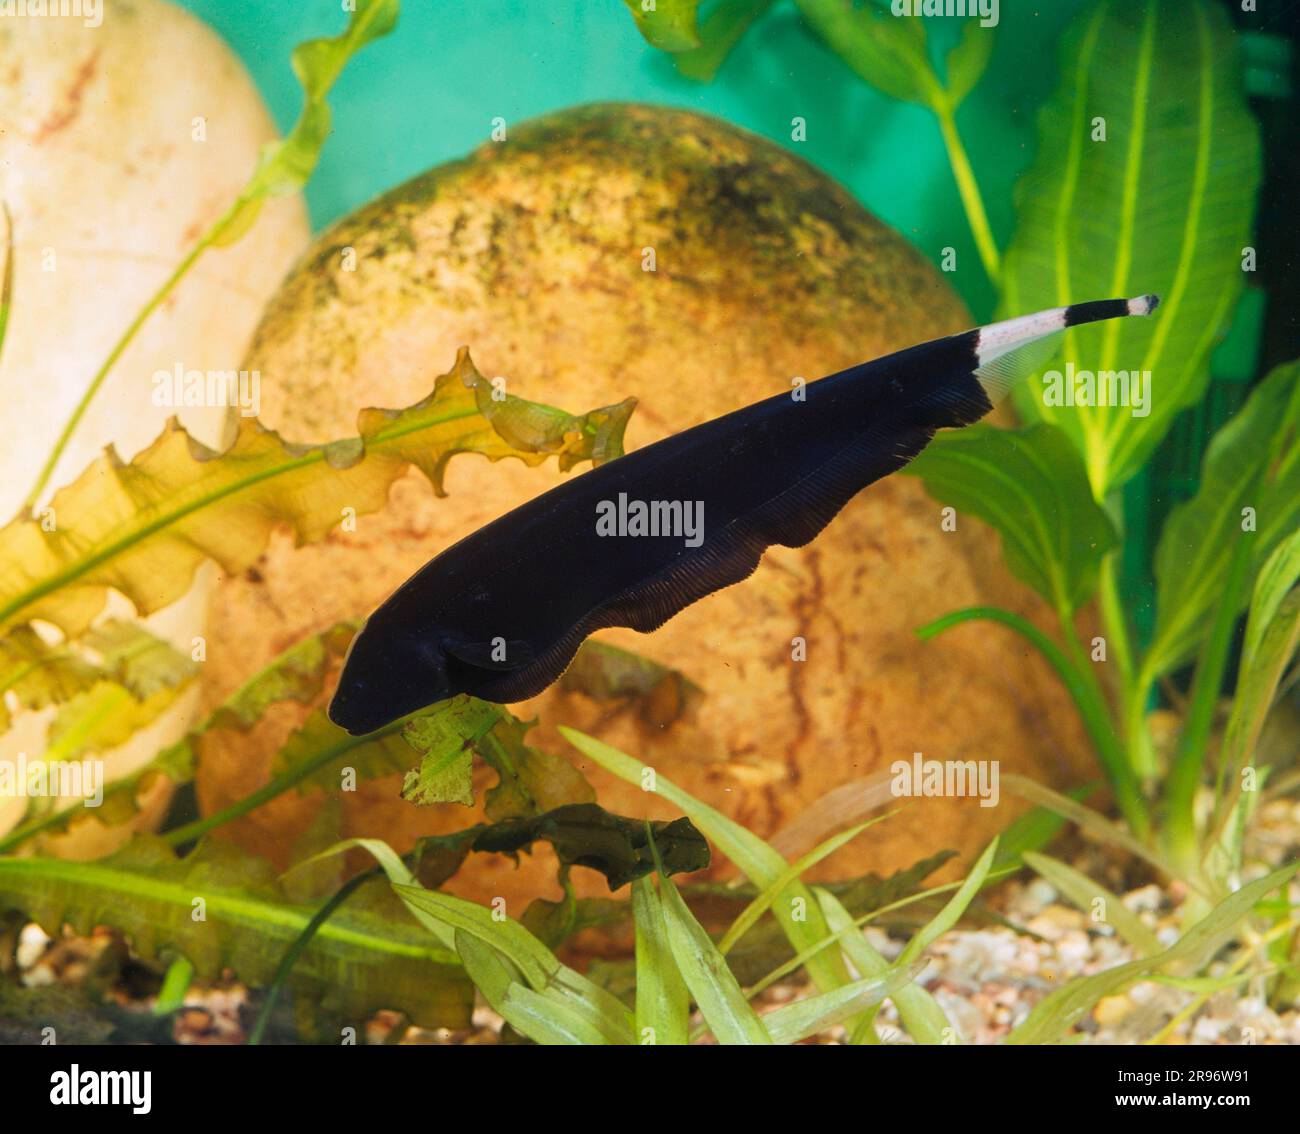 White-fronted knife fish (Sternarchus albifrons) (Apteronotus albifrons) (Gymnotus albifrons), lateral Stock Photo